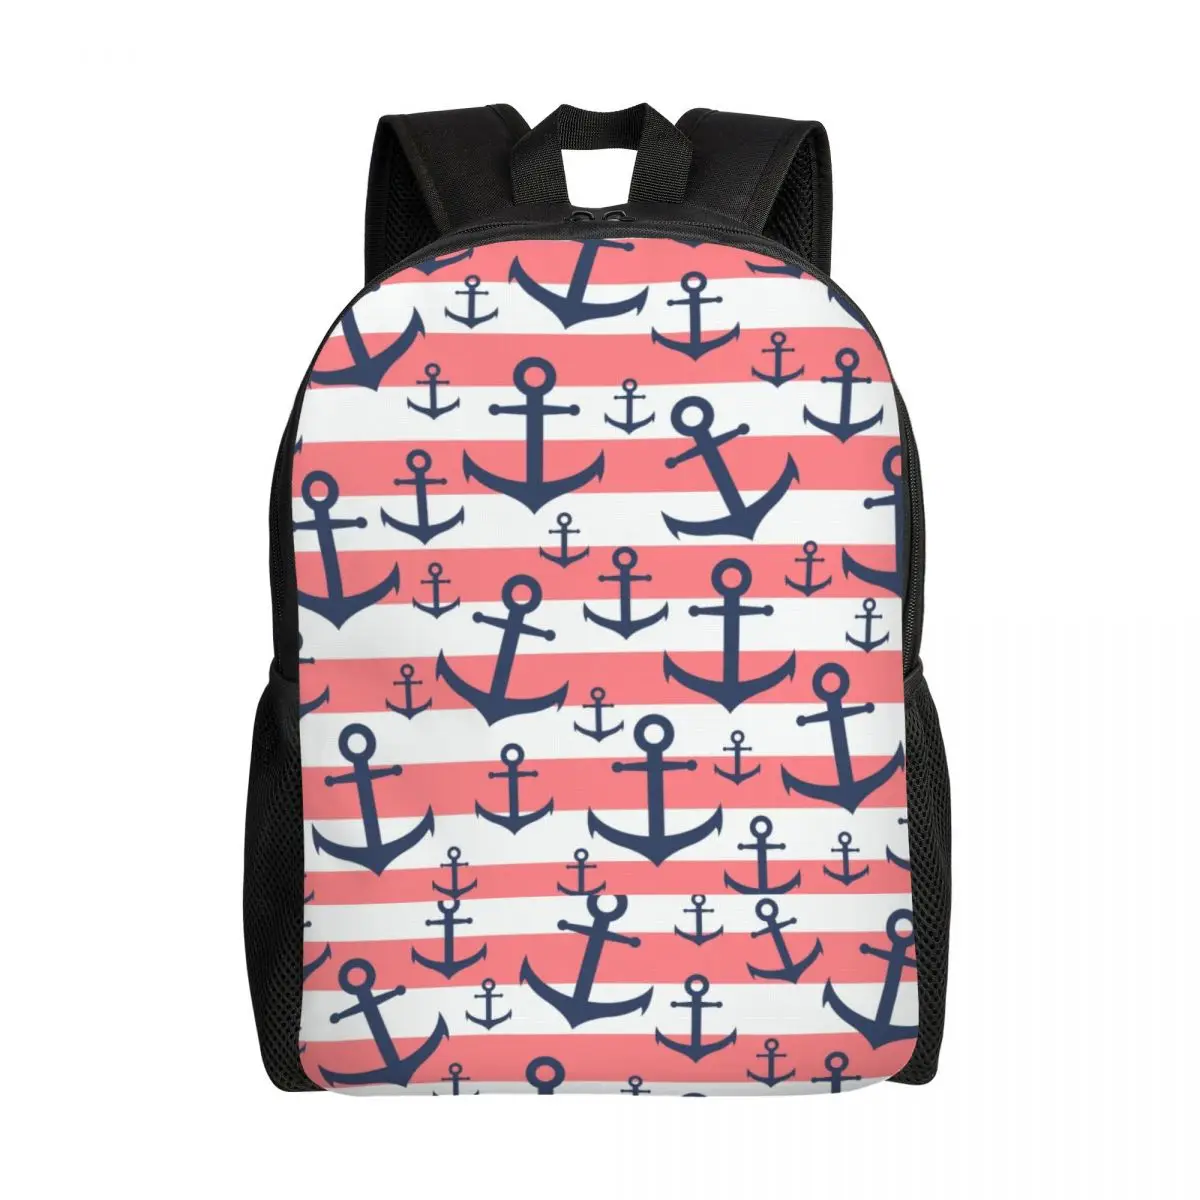 

Nautical Coral Stripe Navy Blue Anchor Pattern Laptop Backpack Women Men Bookbag for College School Student Sailing Sailor Bags